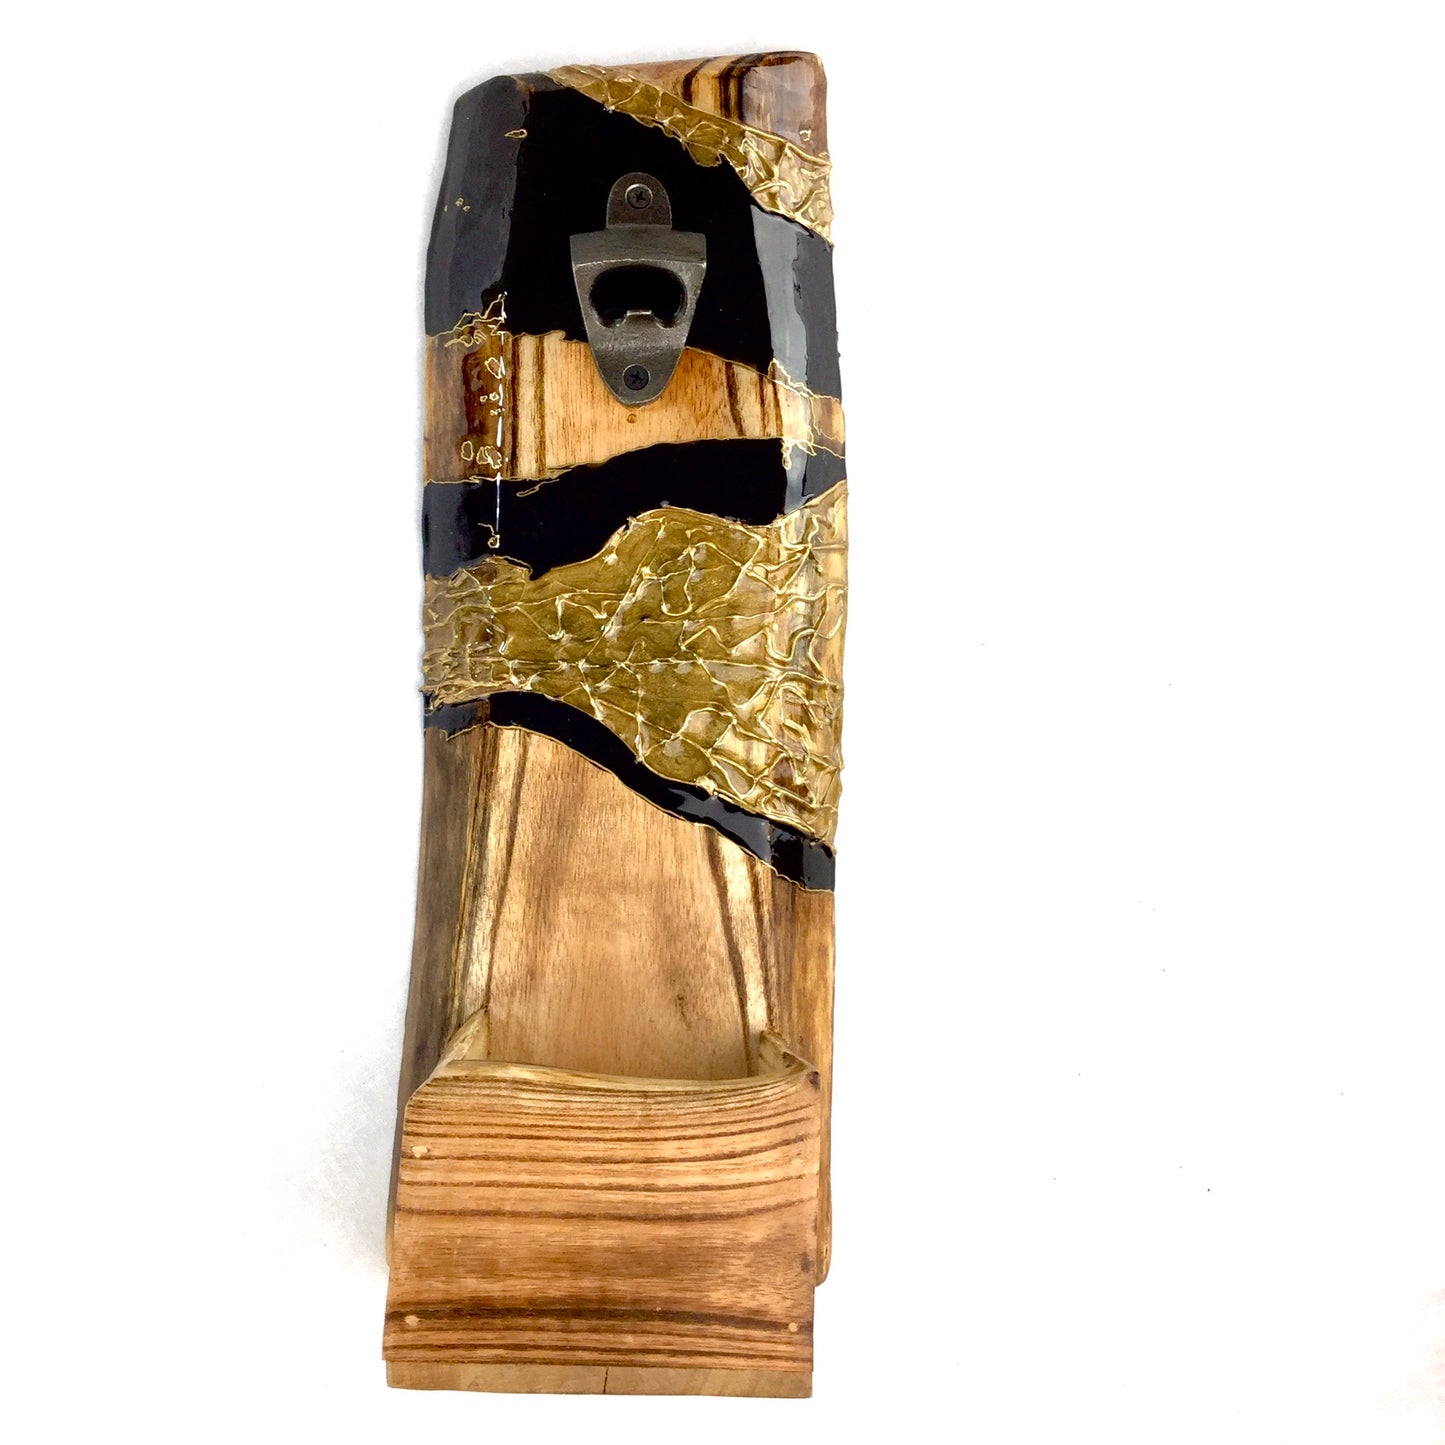 Wooden Bottle Opener with Cap Catch in Black and Gold Abstract Design - Mamota Creative